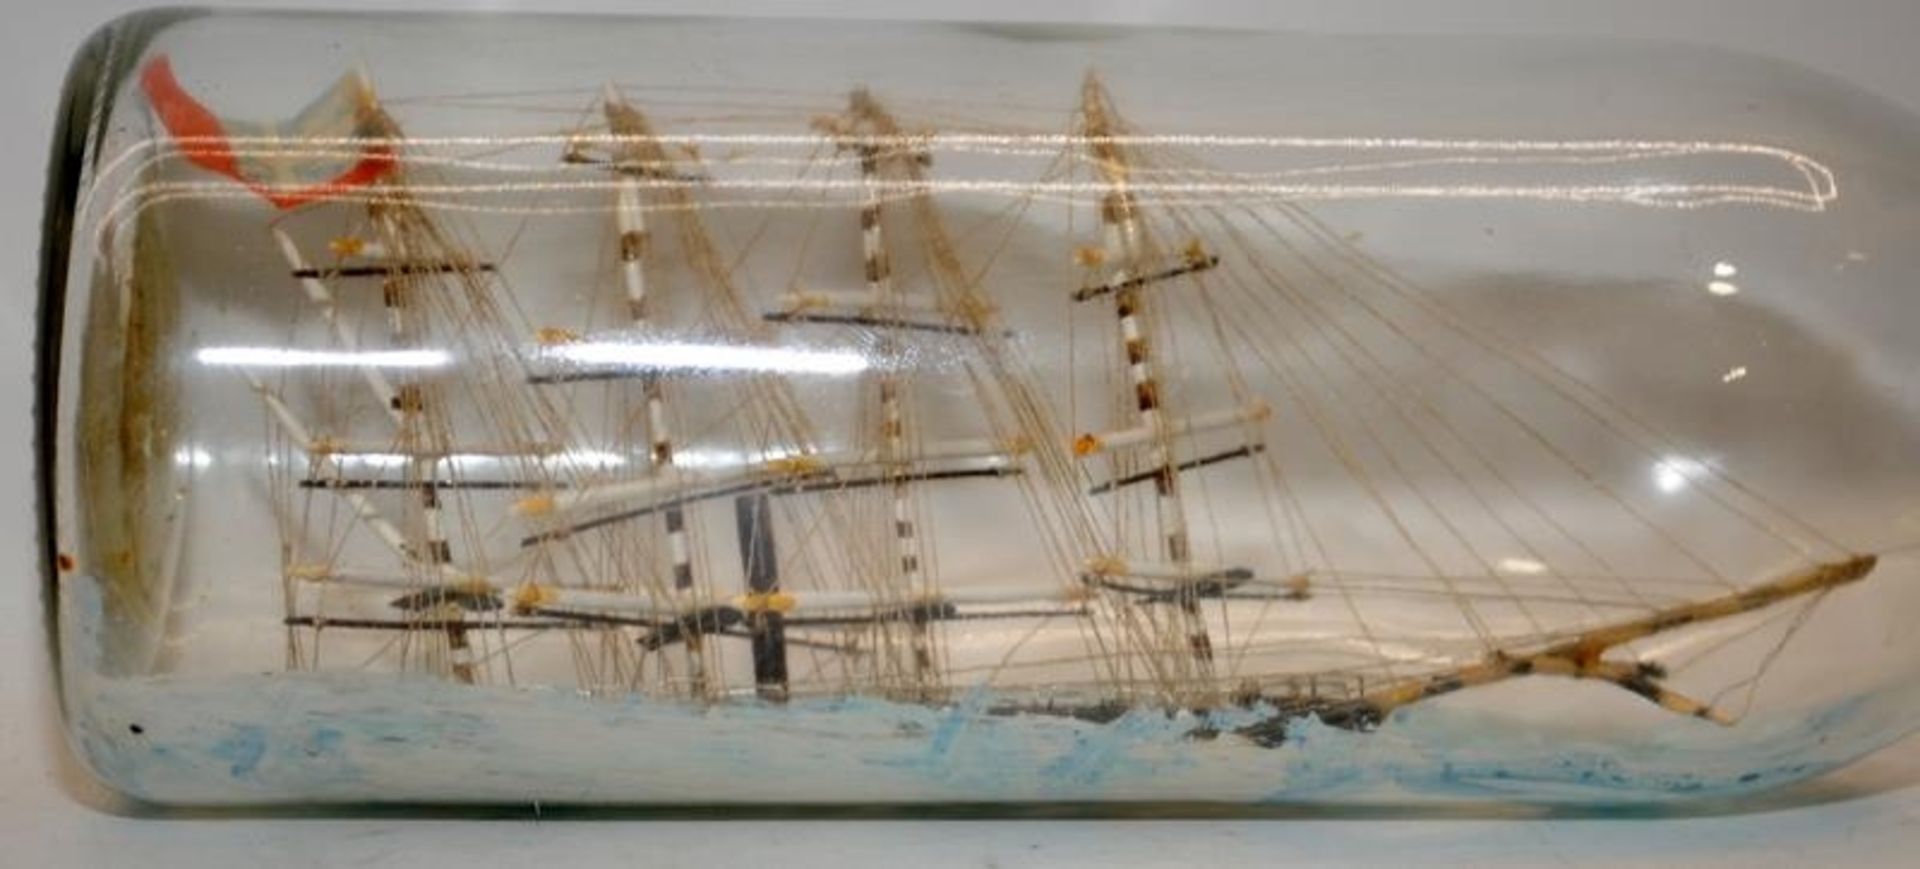 Antique Victorian ship in a bottle. Sailing ship Southern Star, Glasgow 1875. 36cms across - Image 2 of 3